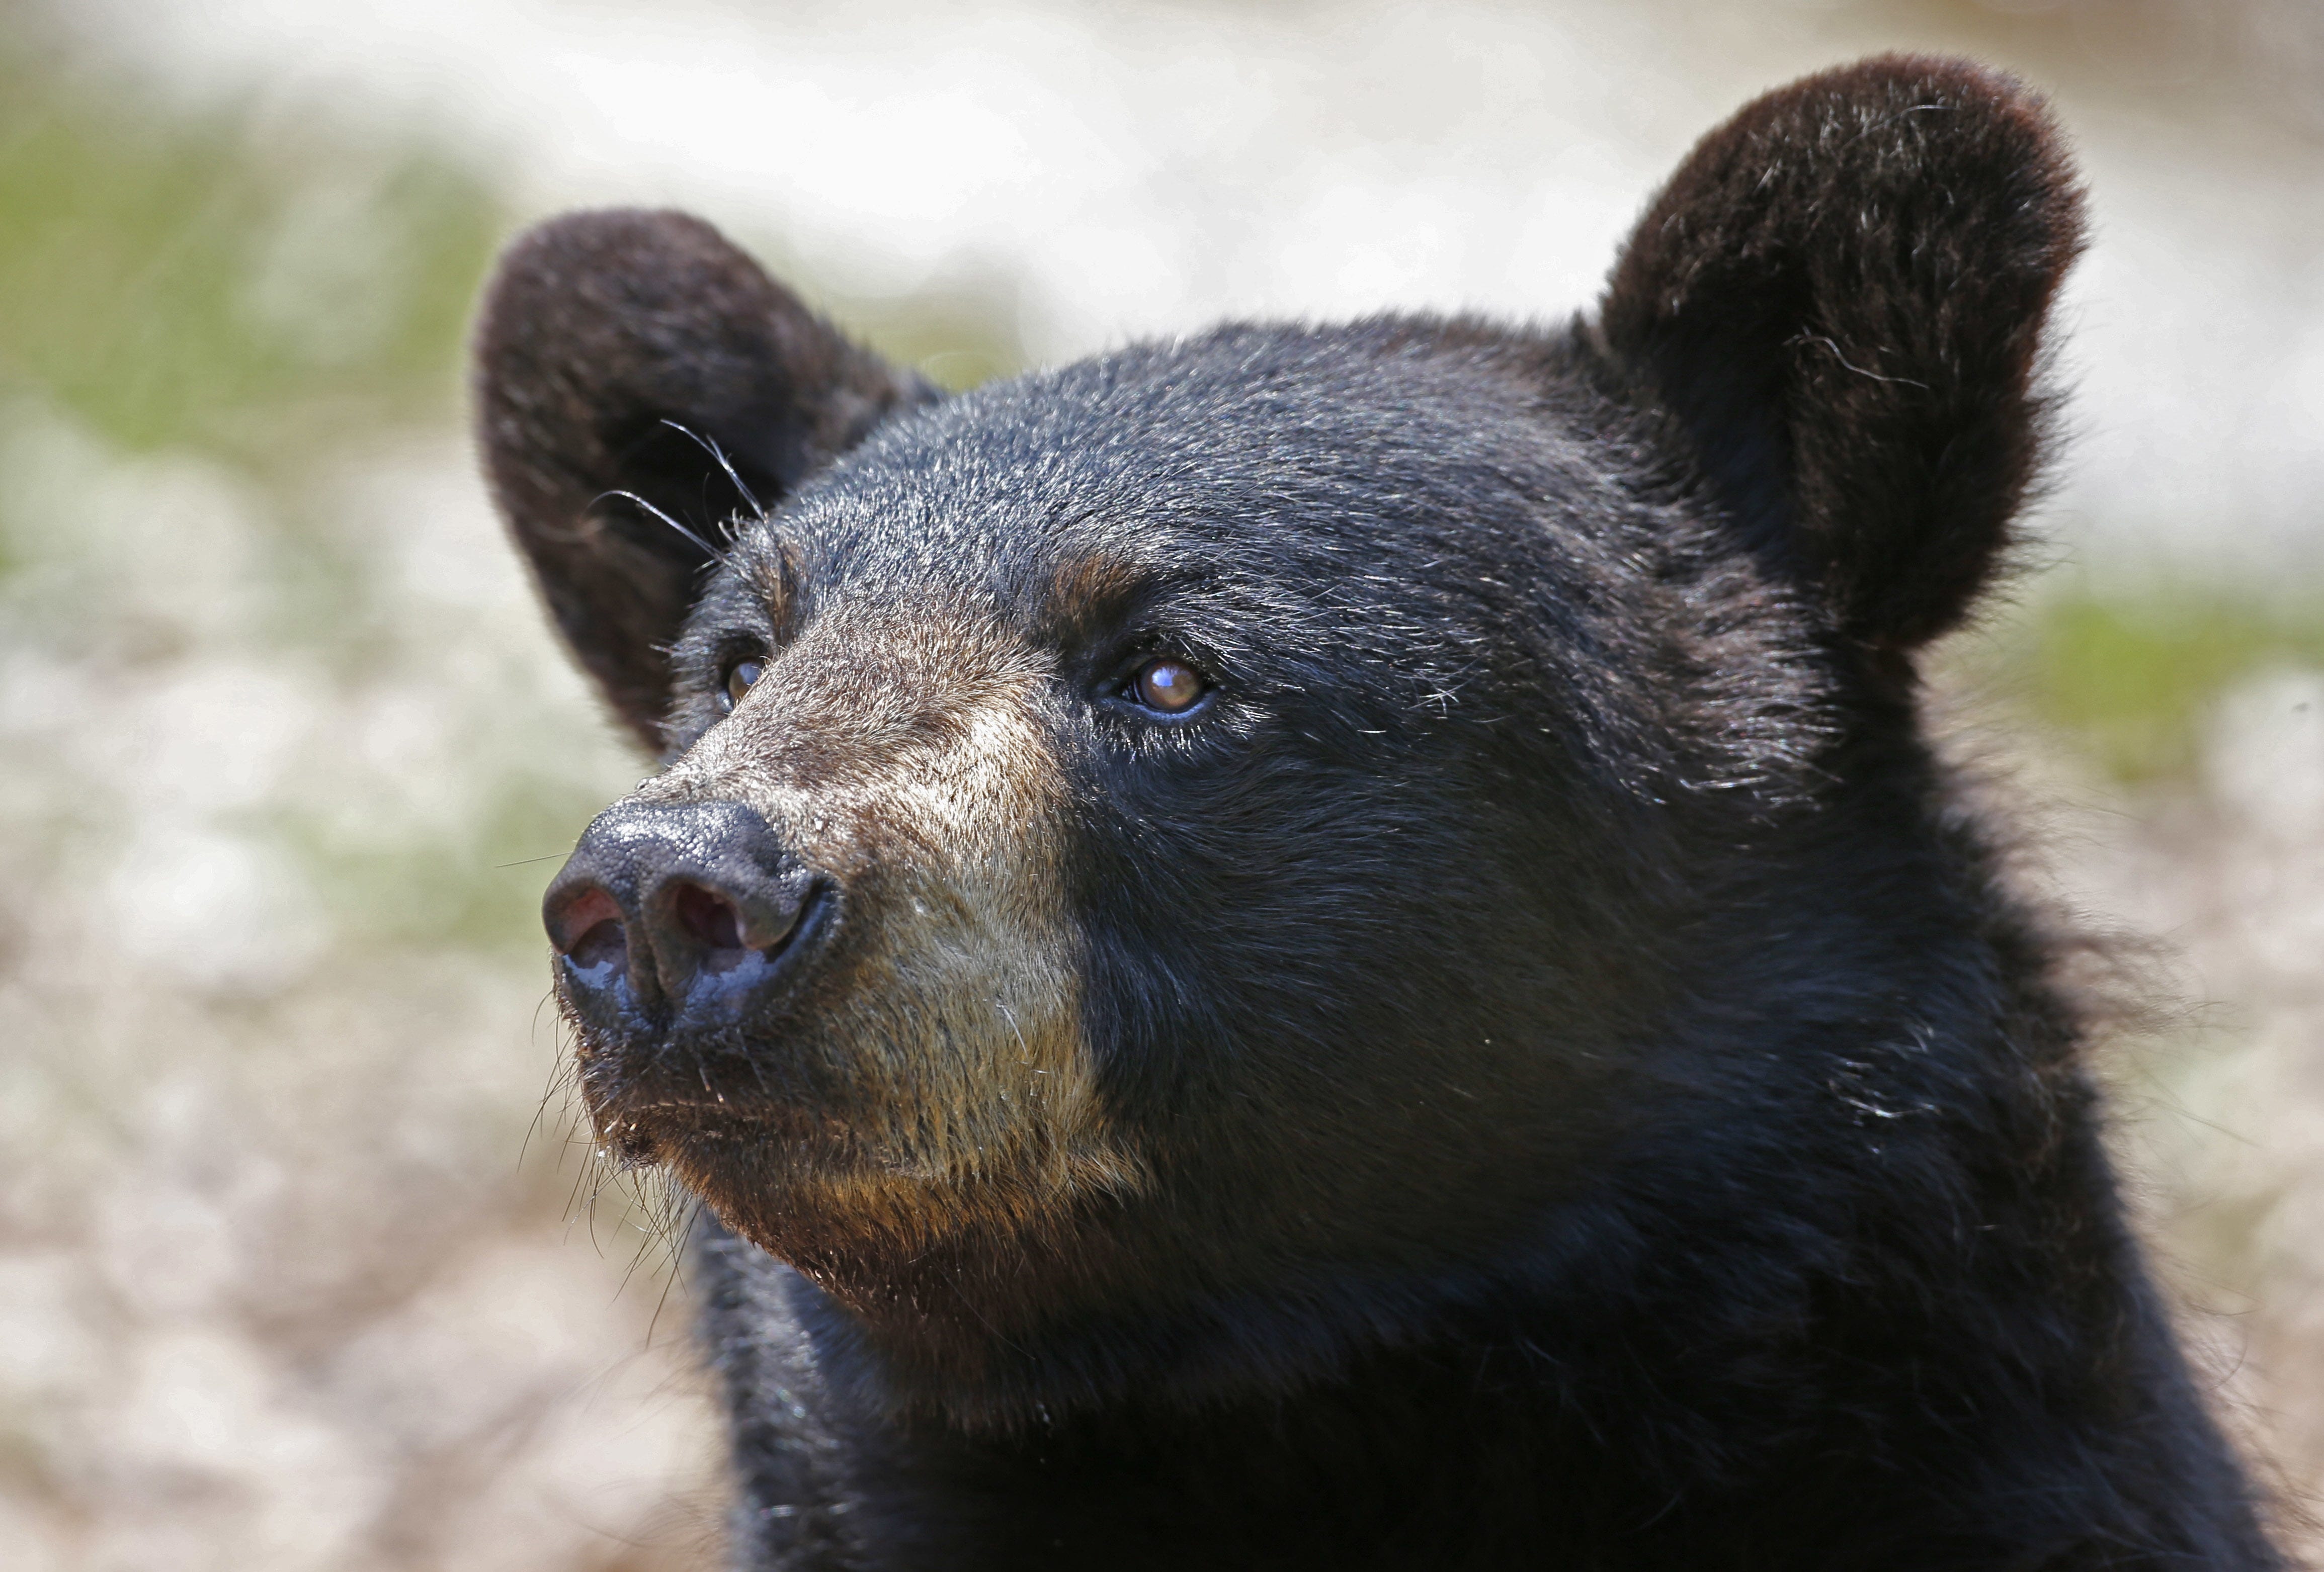 Hunters, activists want bear plan they can bear